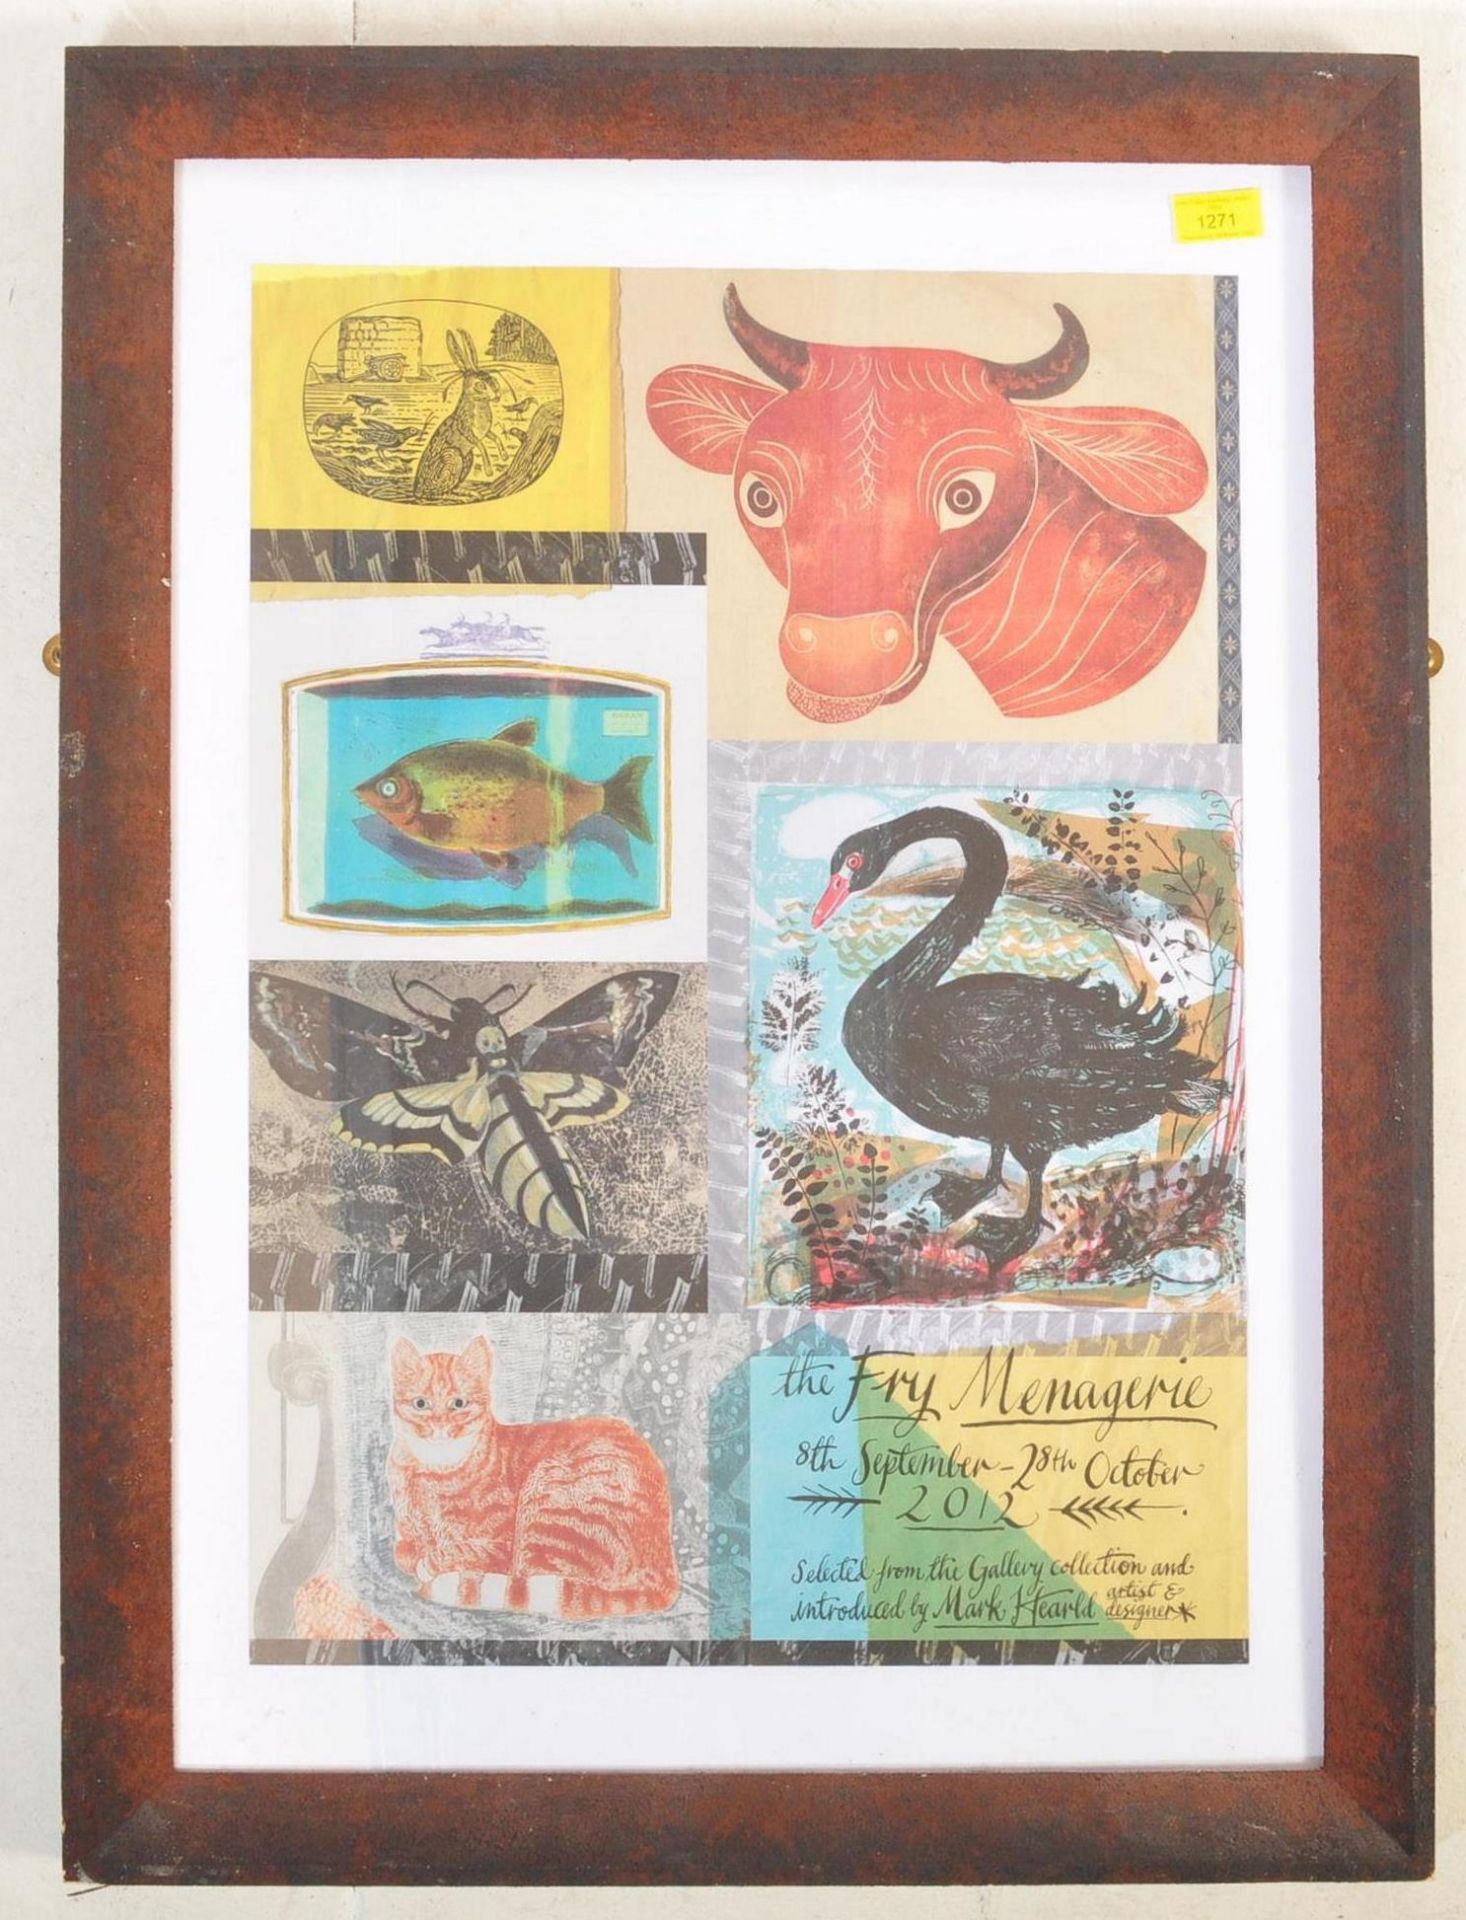 MARK HEARLD FRY MENAGERIE EXHIBITION POSTER